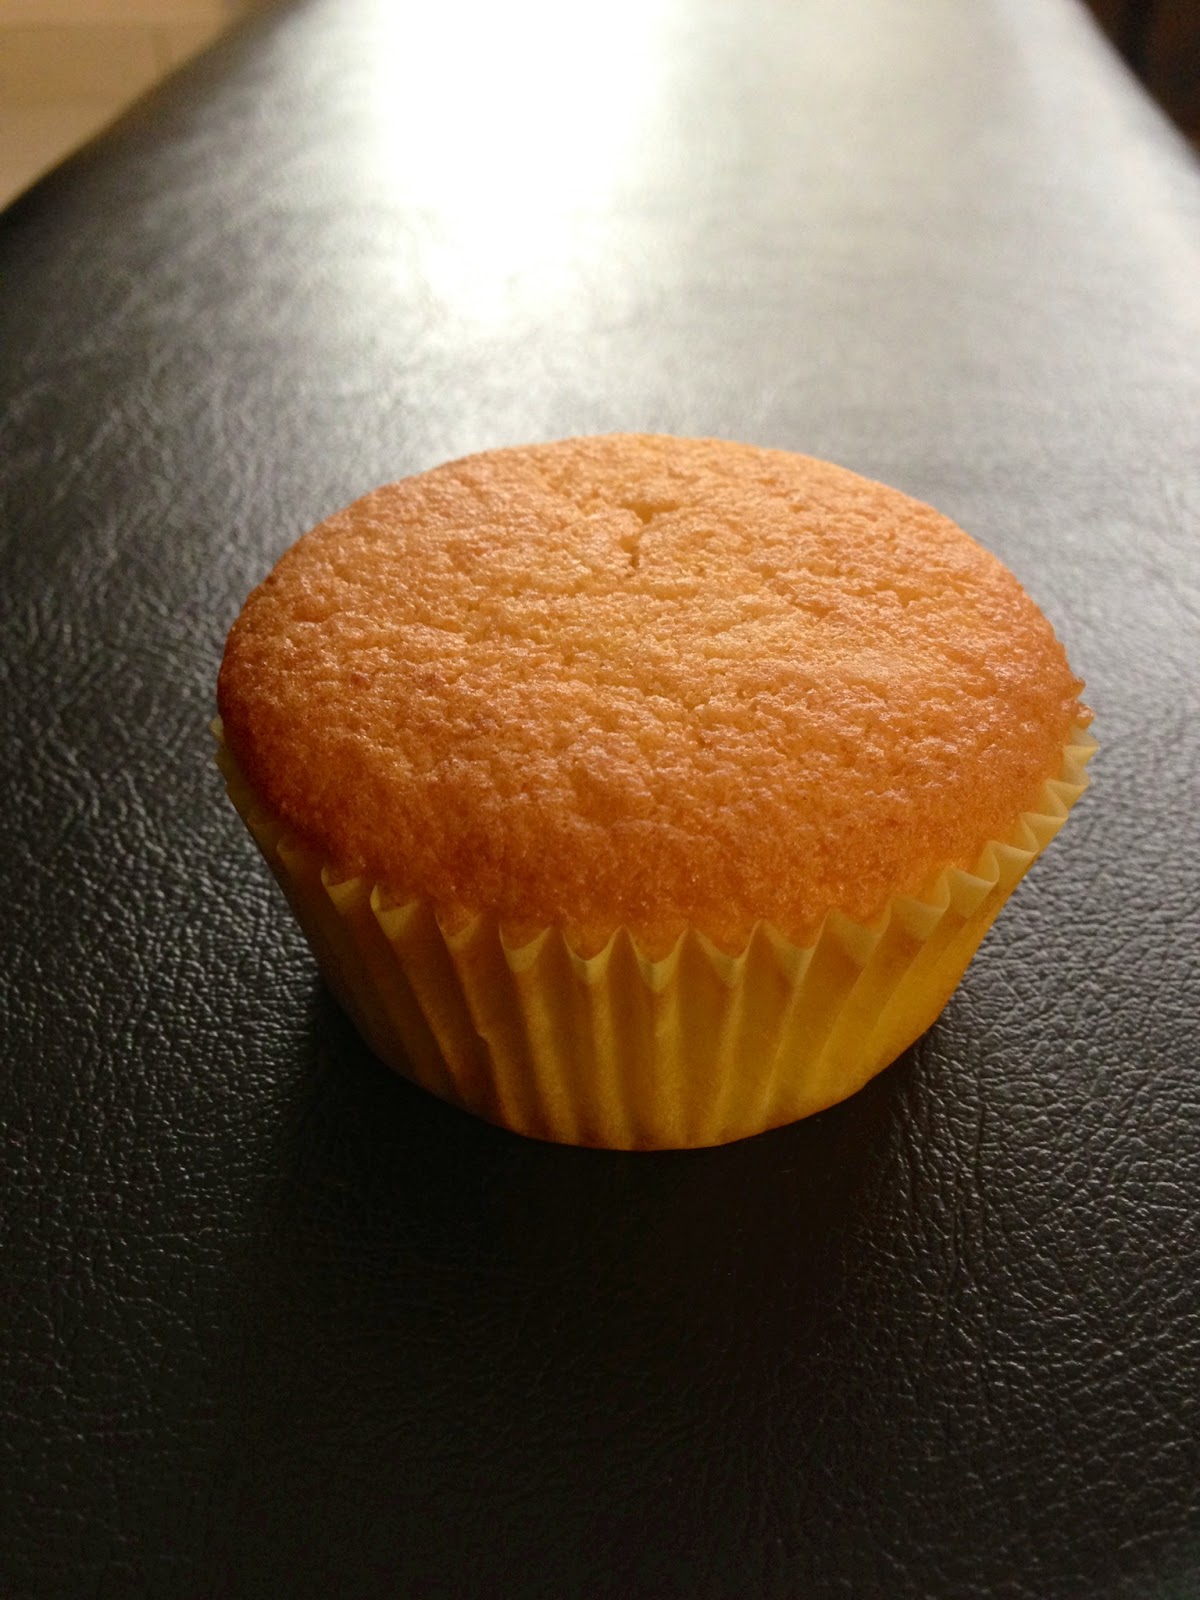 how Orange cupcakes  Healthy Light Sponge Recipe : to eating fluffy  make  light  (butter  Cupcakes recipe less!)